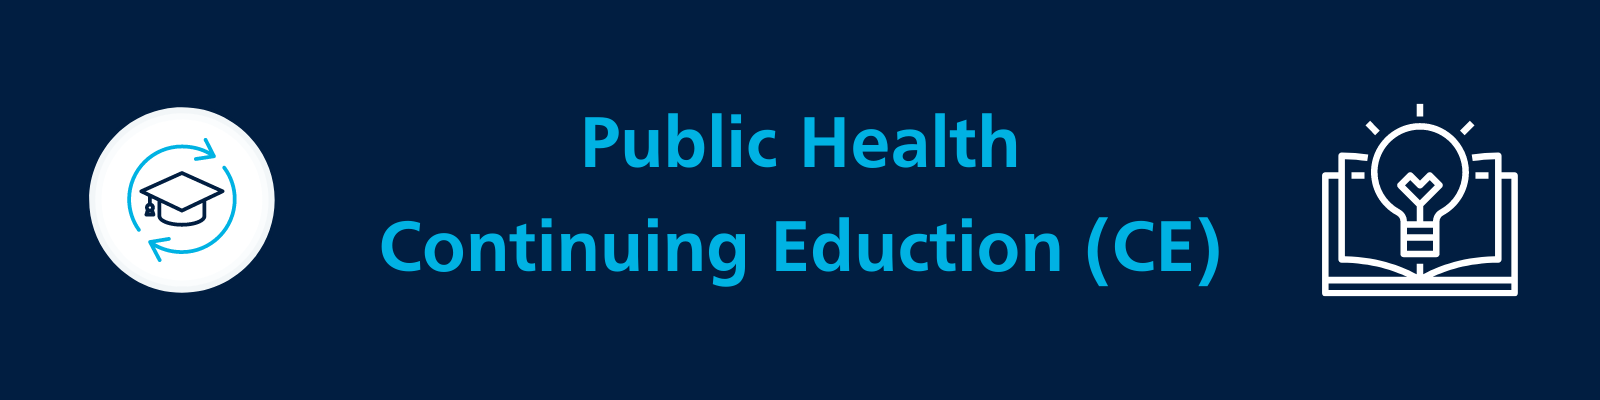 public health continuing education ce banner